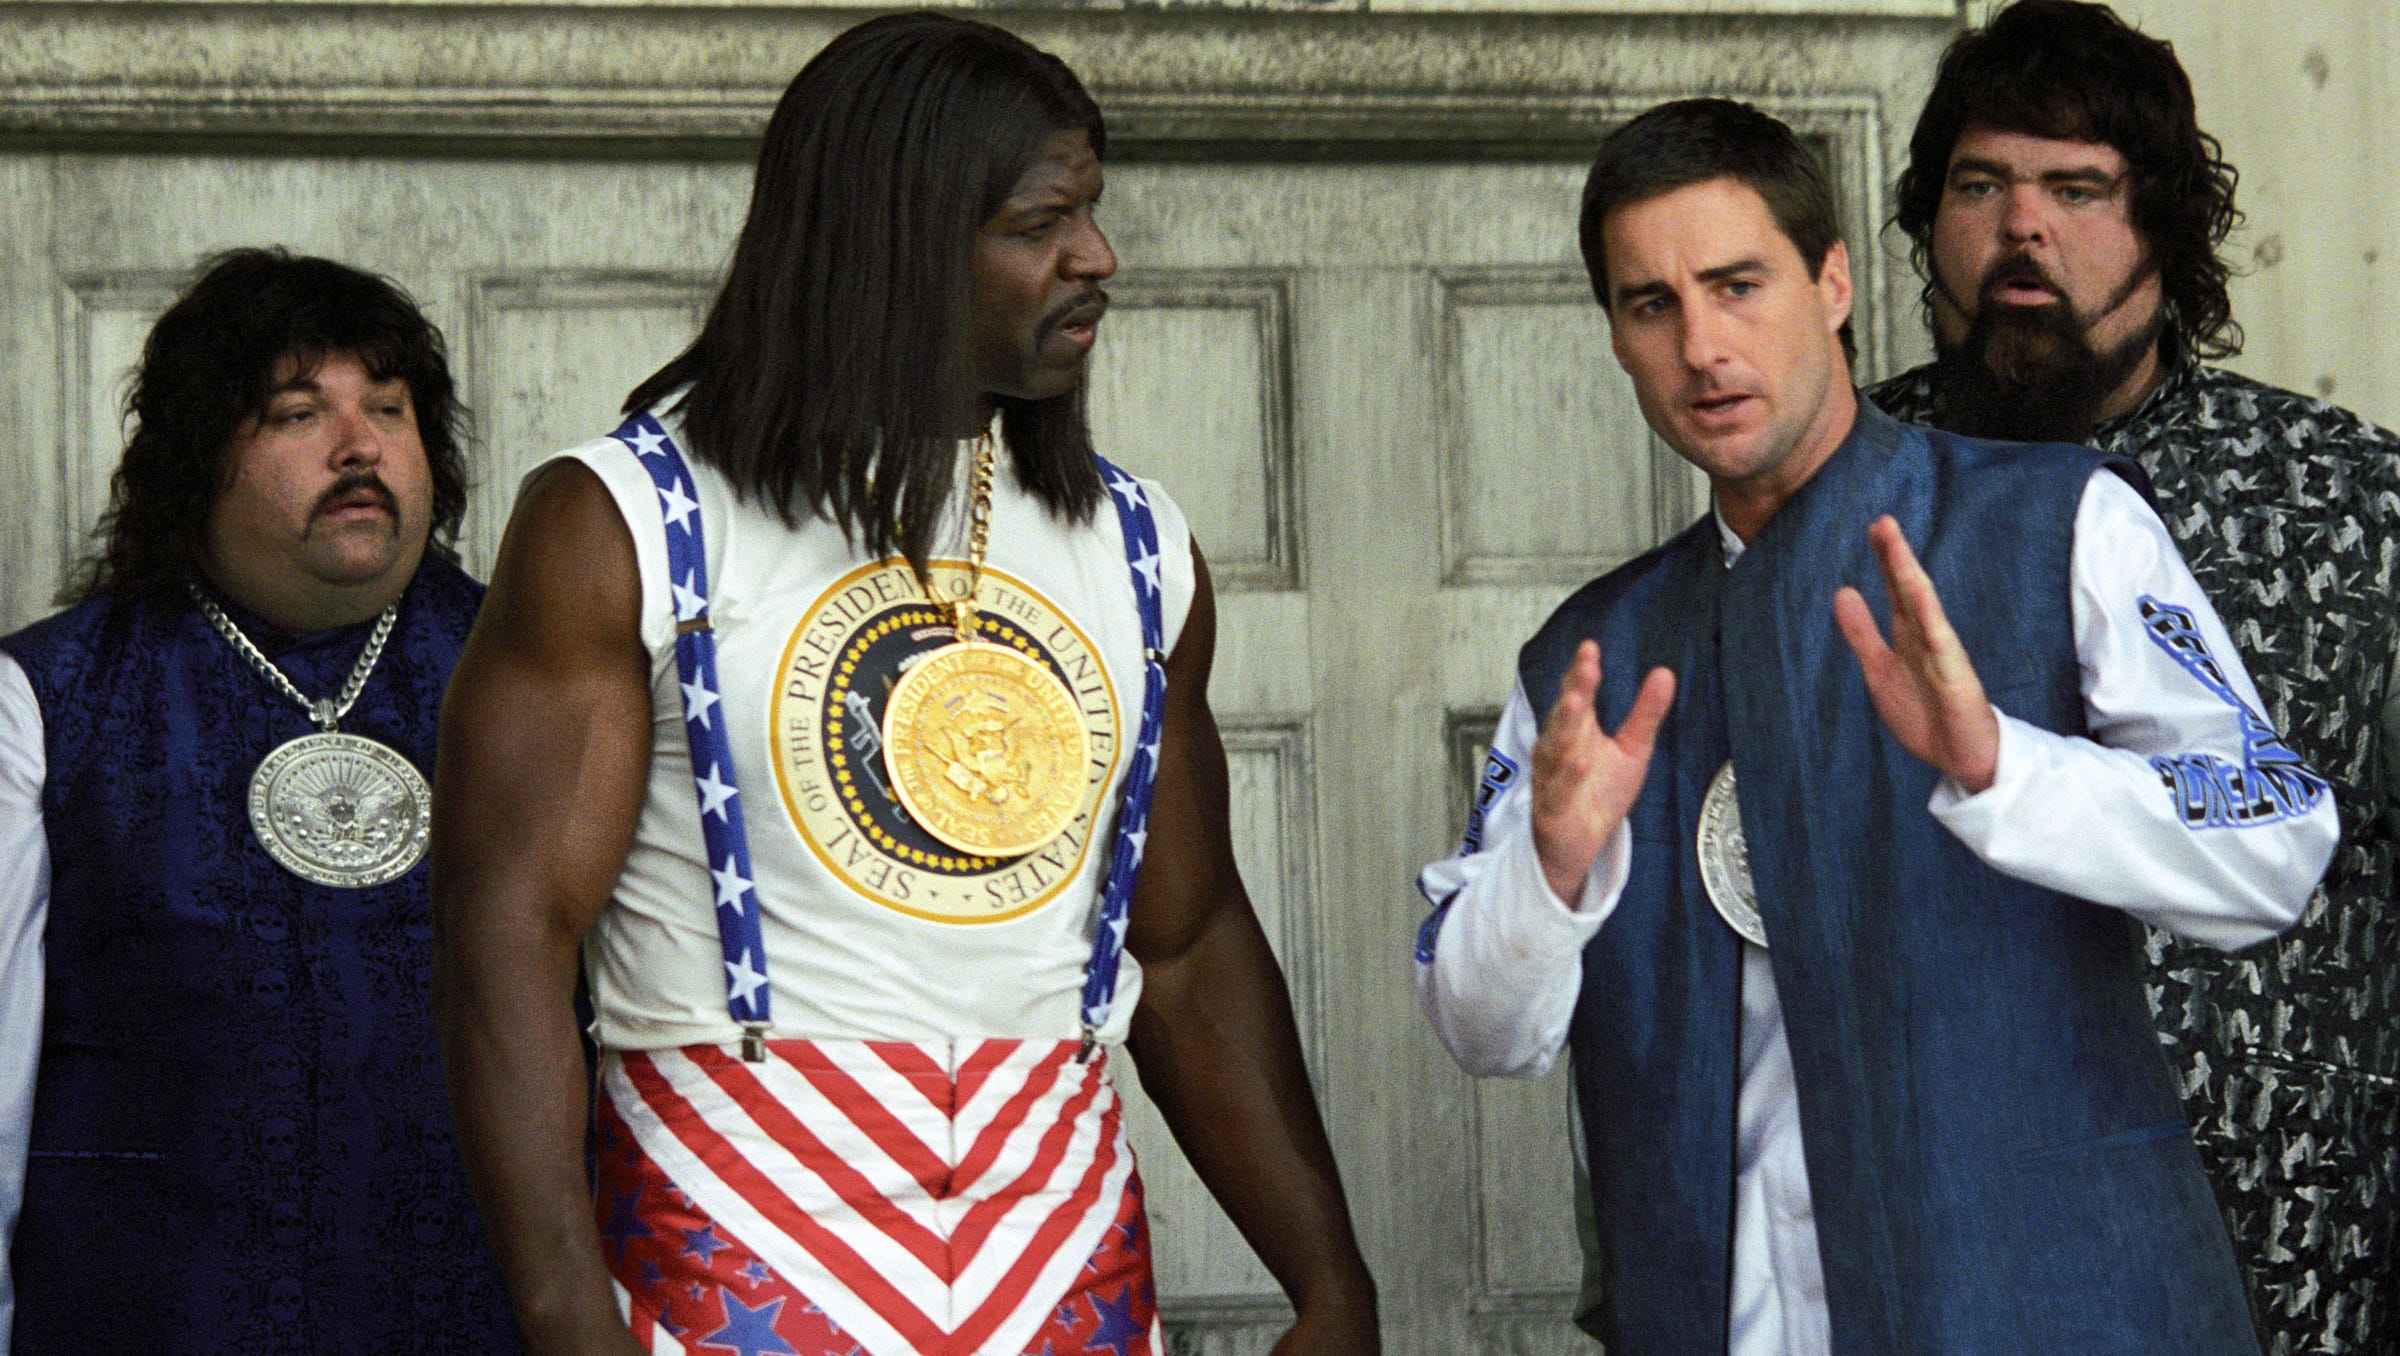 Idiocracy' goes from cult classic to election statement